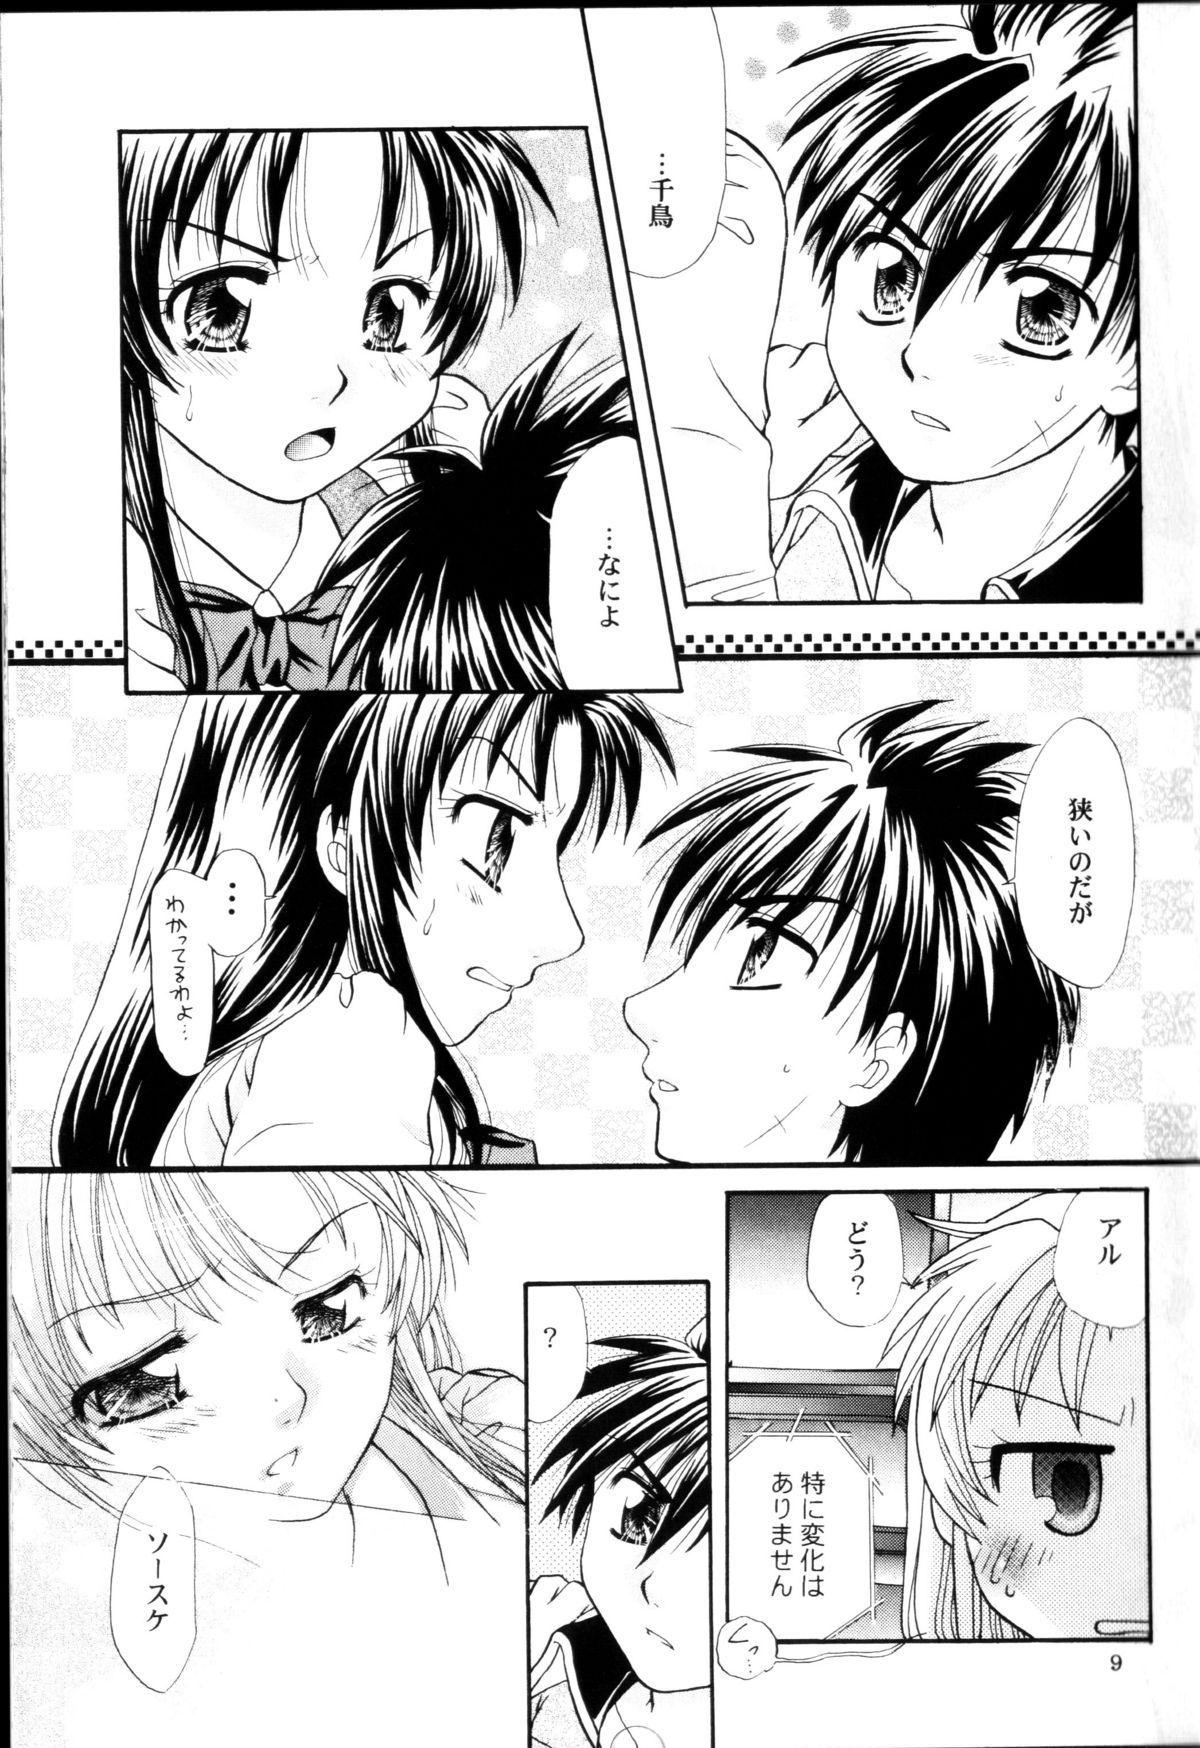 Bisex A.I. - Full metal panic Abuse - Page 8